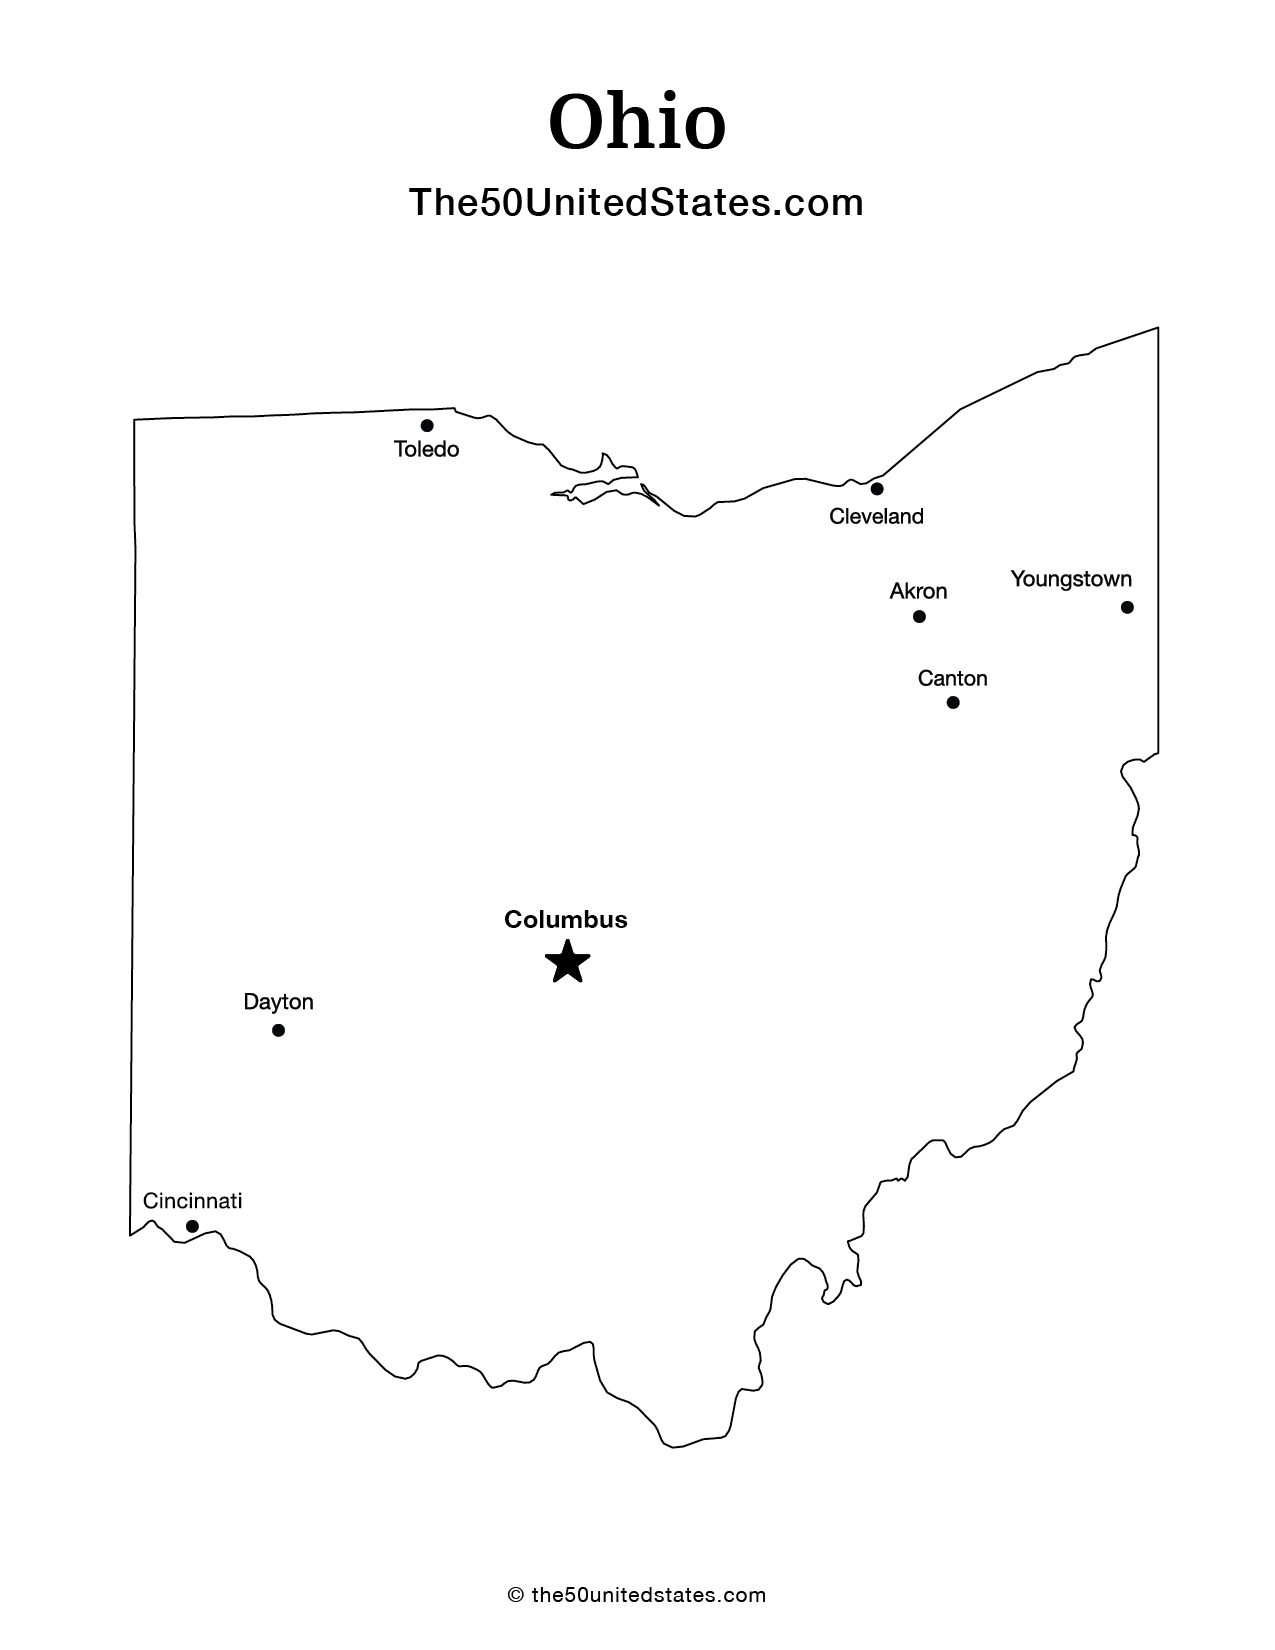 Map of Ohio with Cities (Labeled)